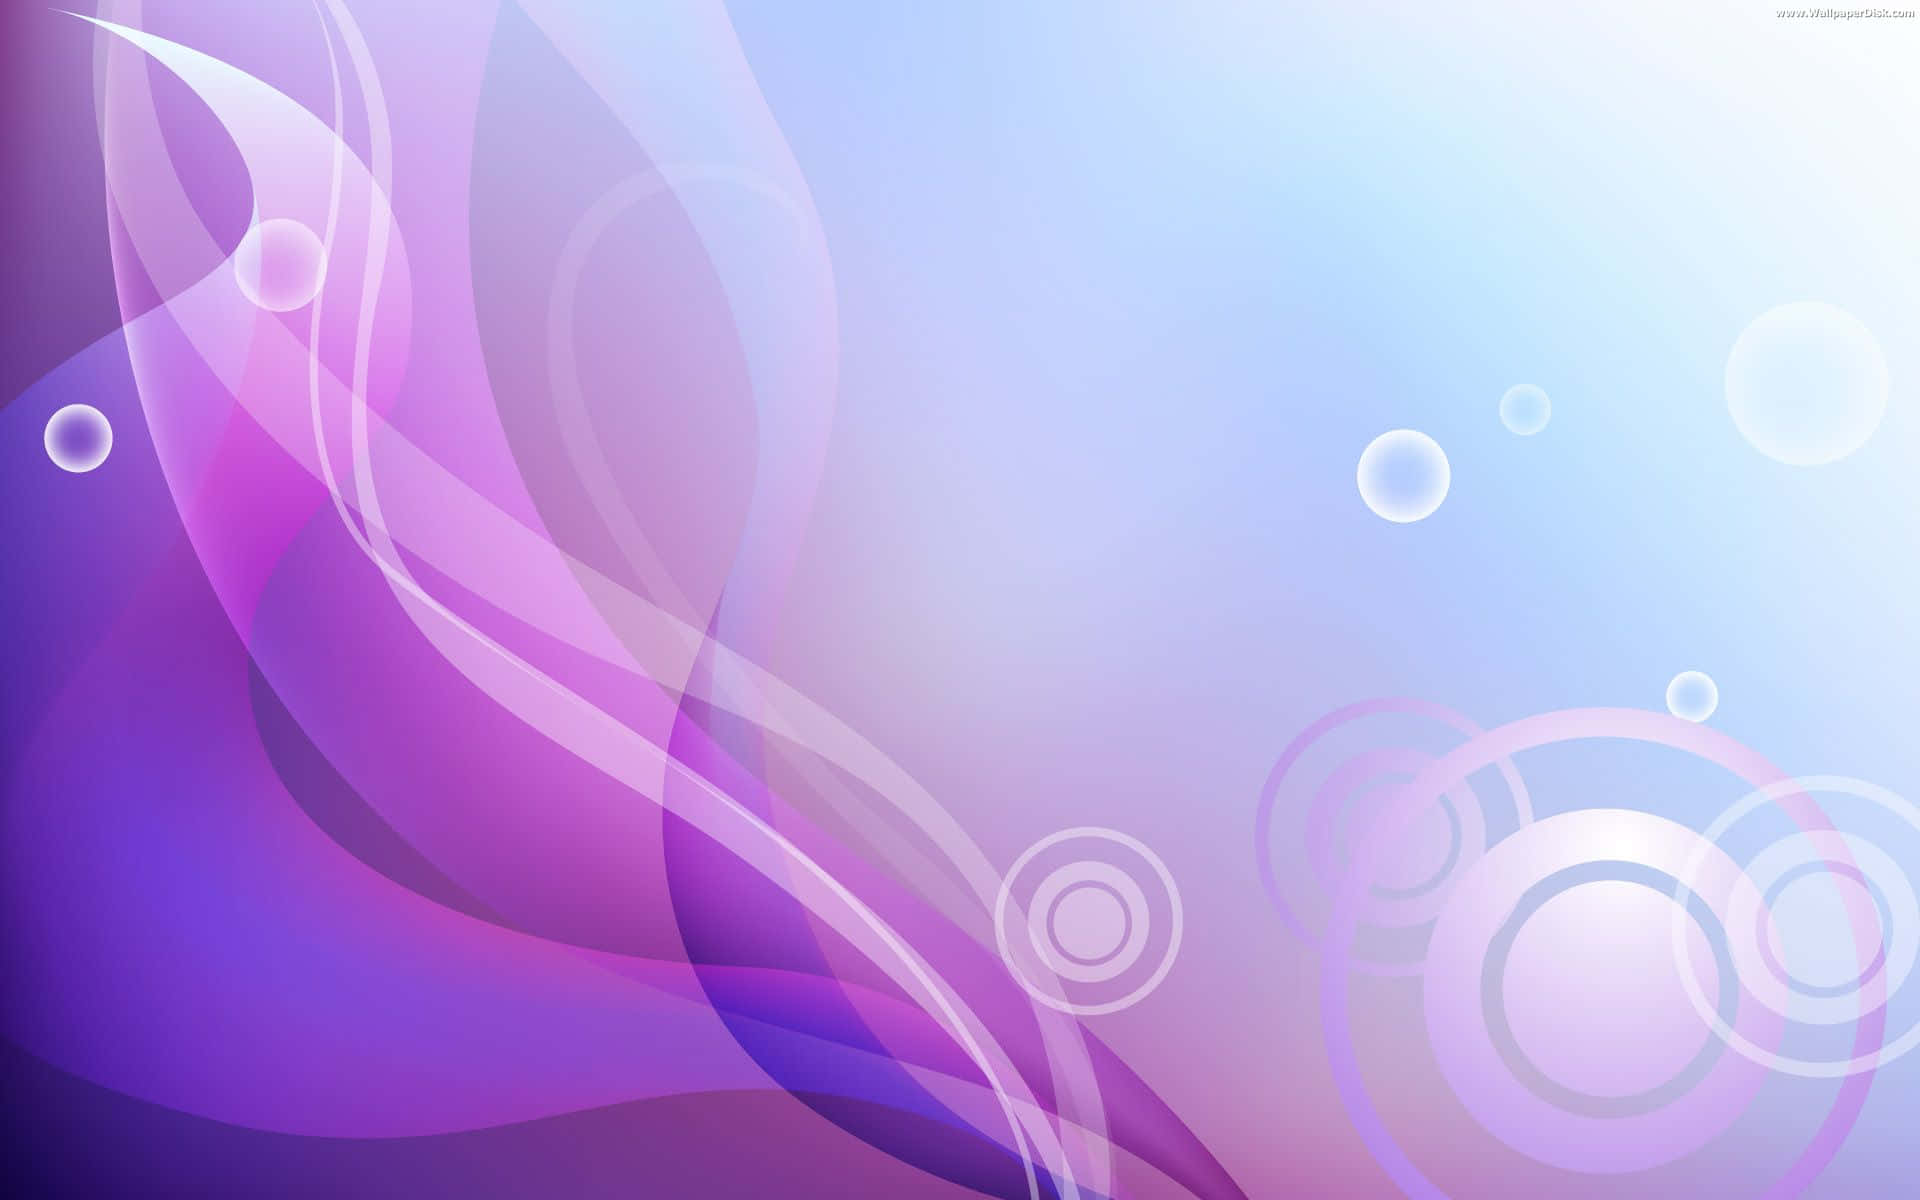 A mesmerizing purple abstract background Wallpaper